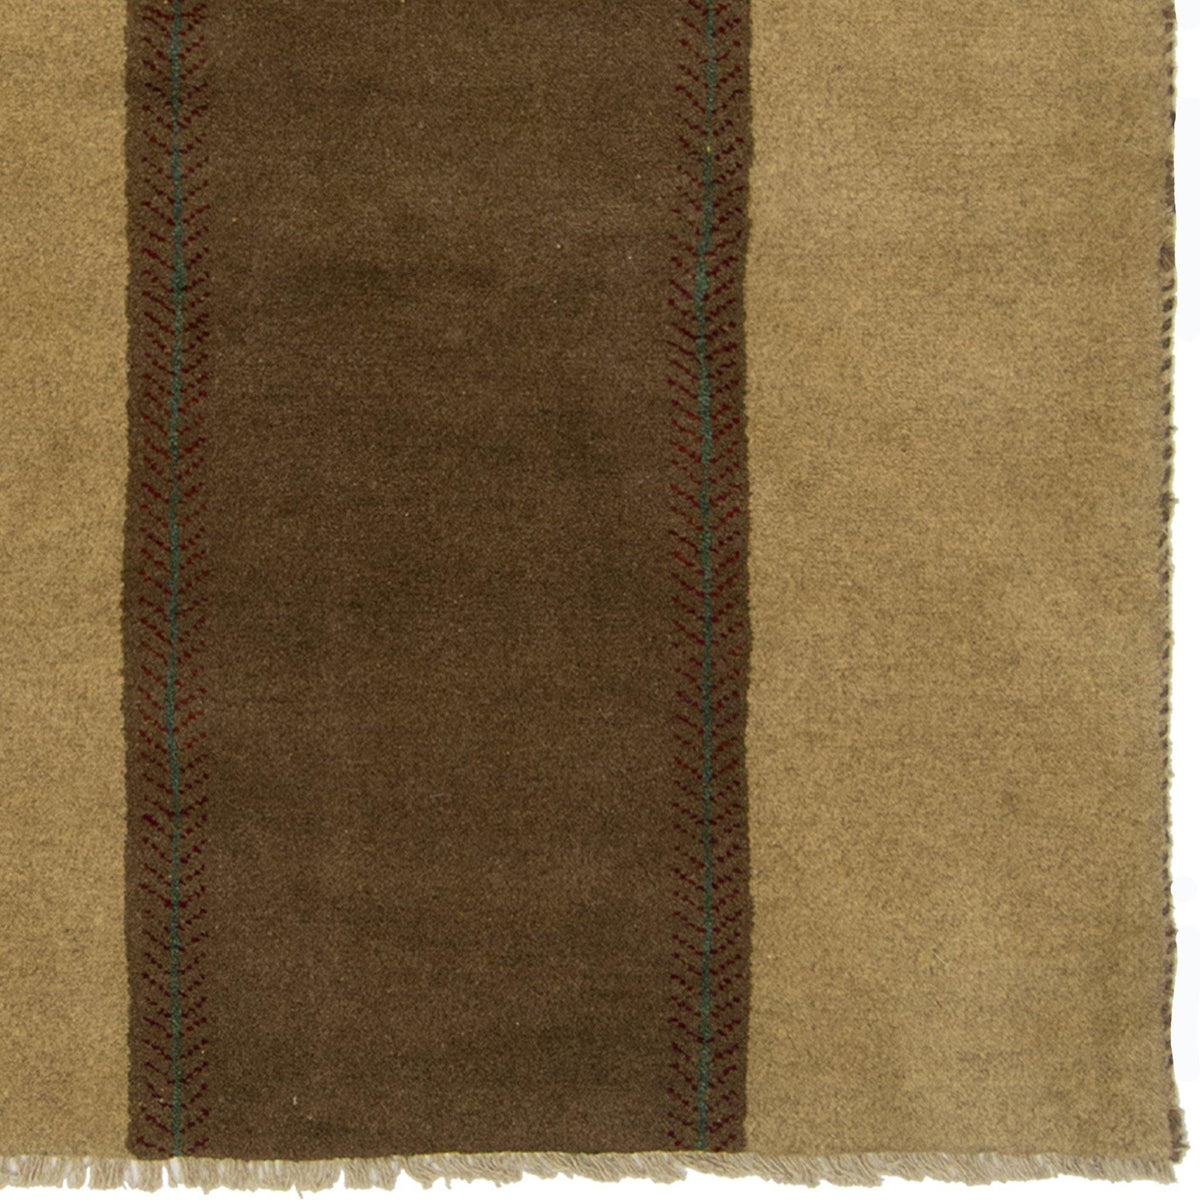 Hand-knotted 100% Wool Gabbeh Small Rug 99cm x 140cm